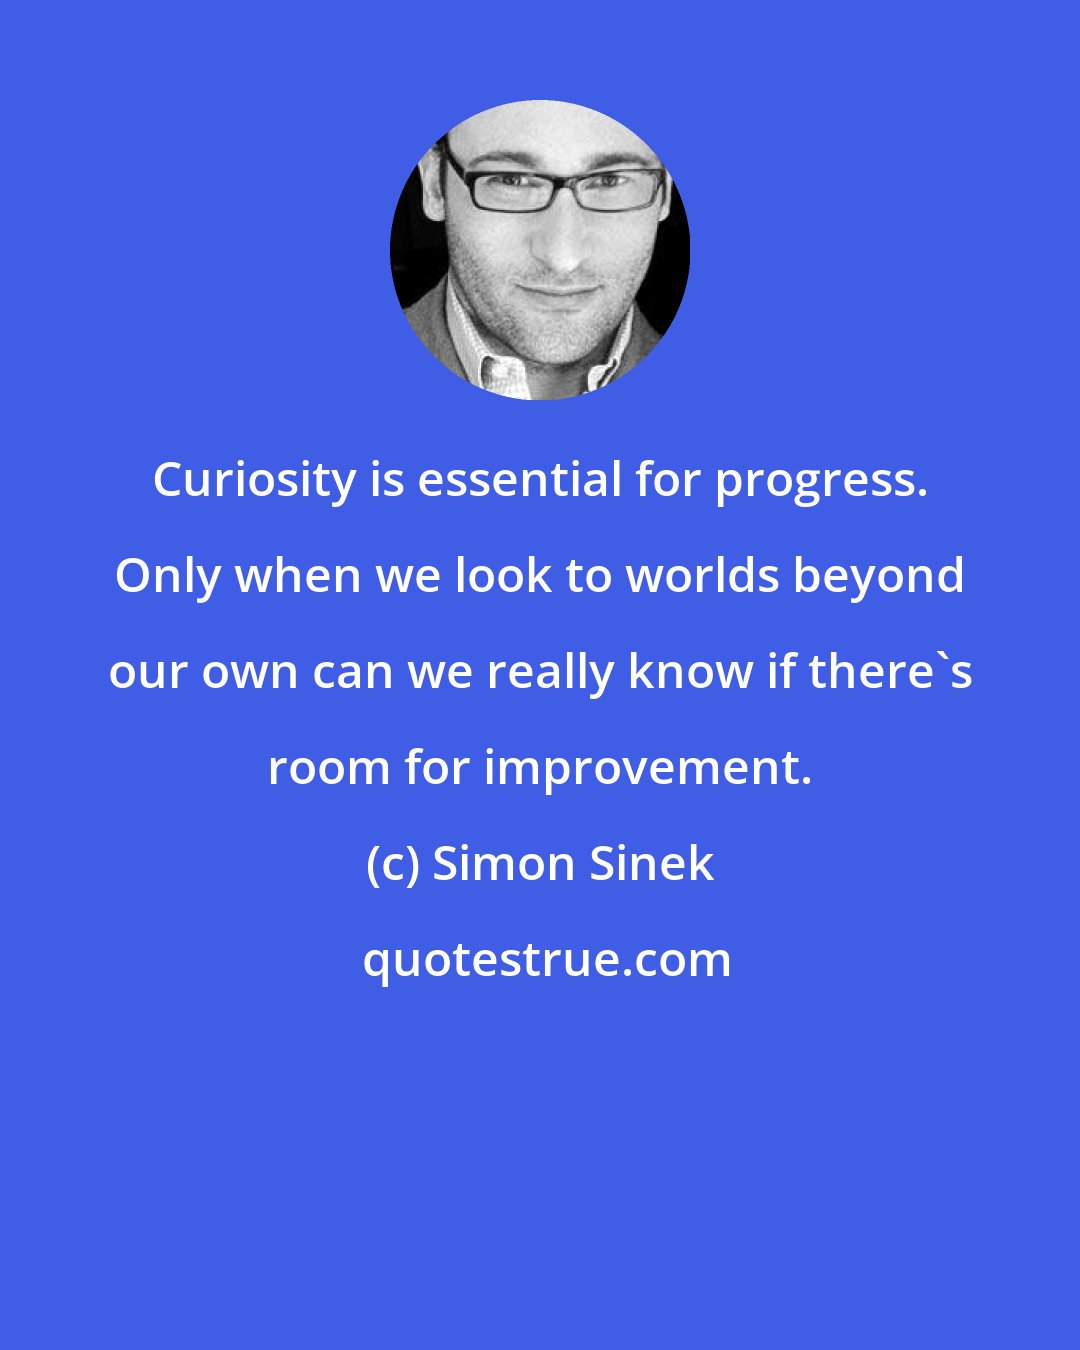 Simon Sinek: Curiosity is essential for progress. Only when we look to worlds beyond our own can we really know if there's room for improvement.